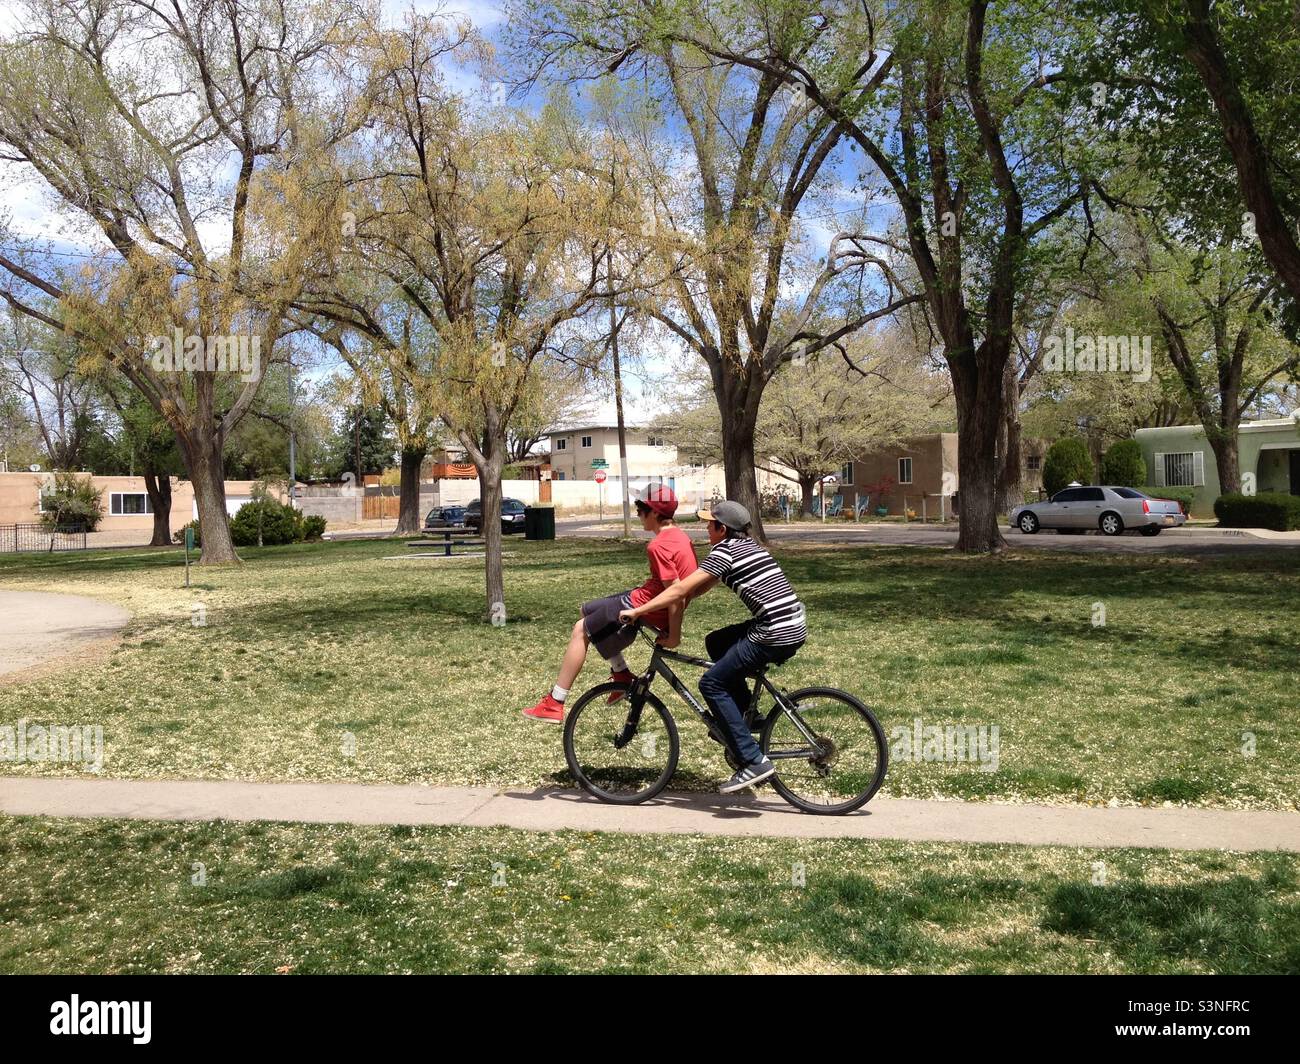 Two middle school age boys ride on a bike in United States, public park, Springtime. Stock Photo